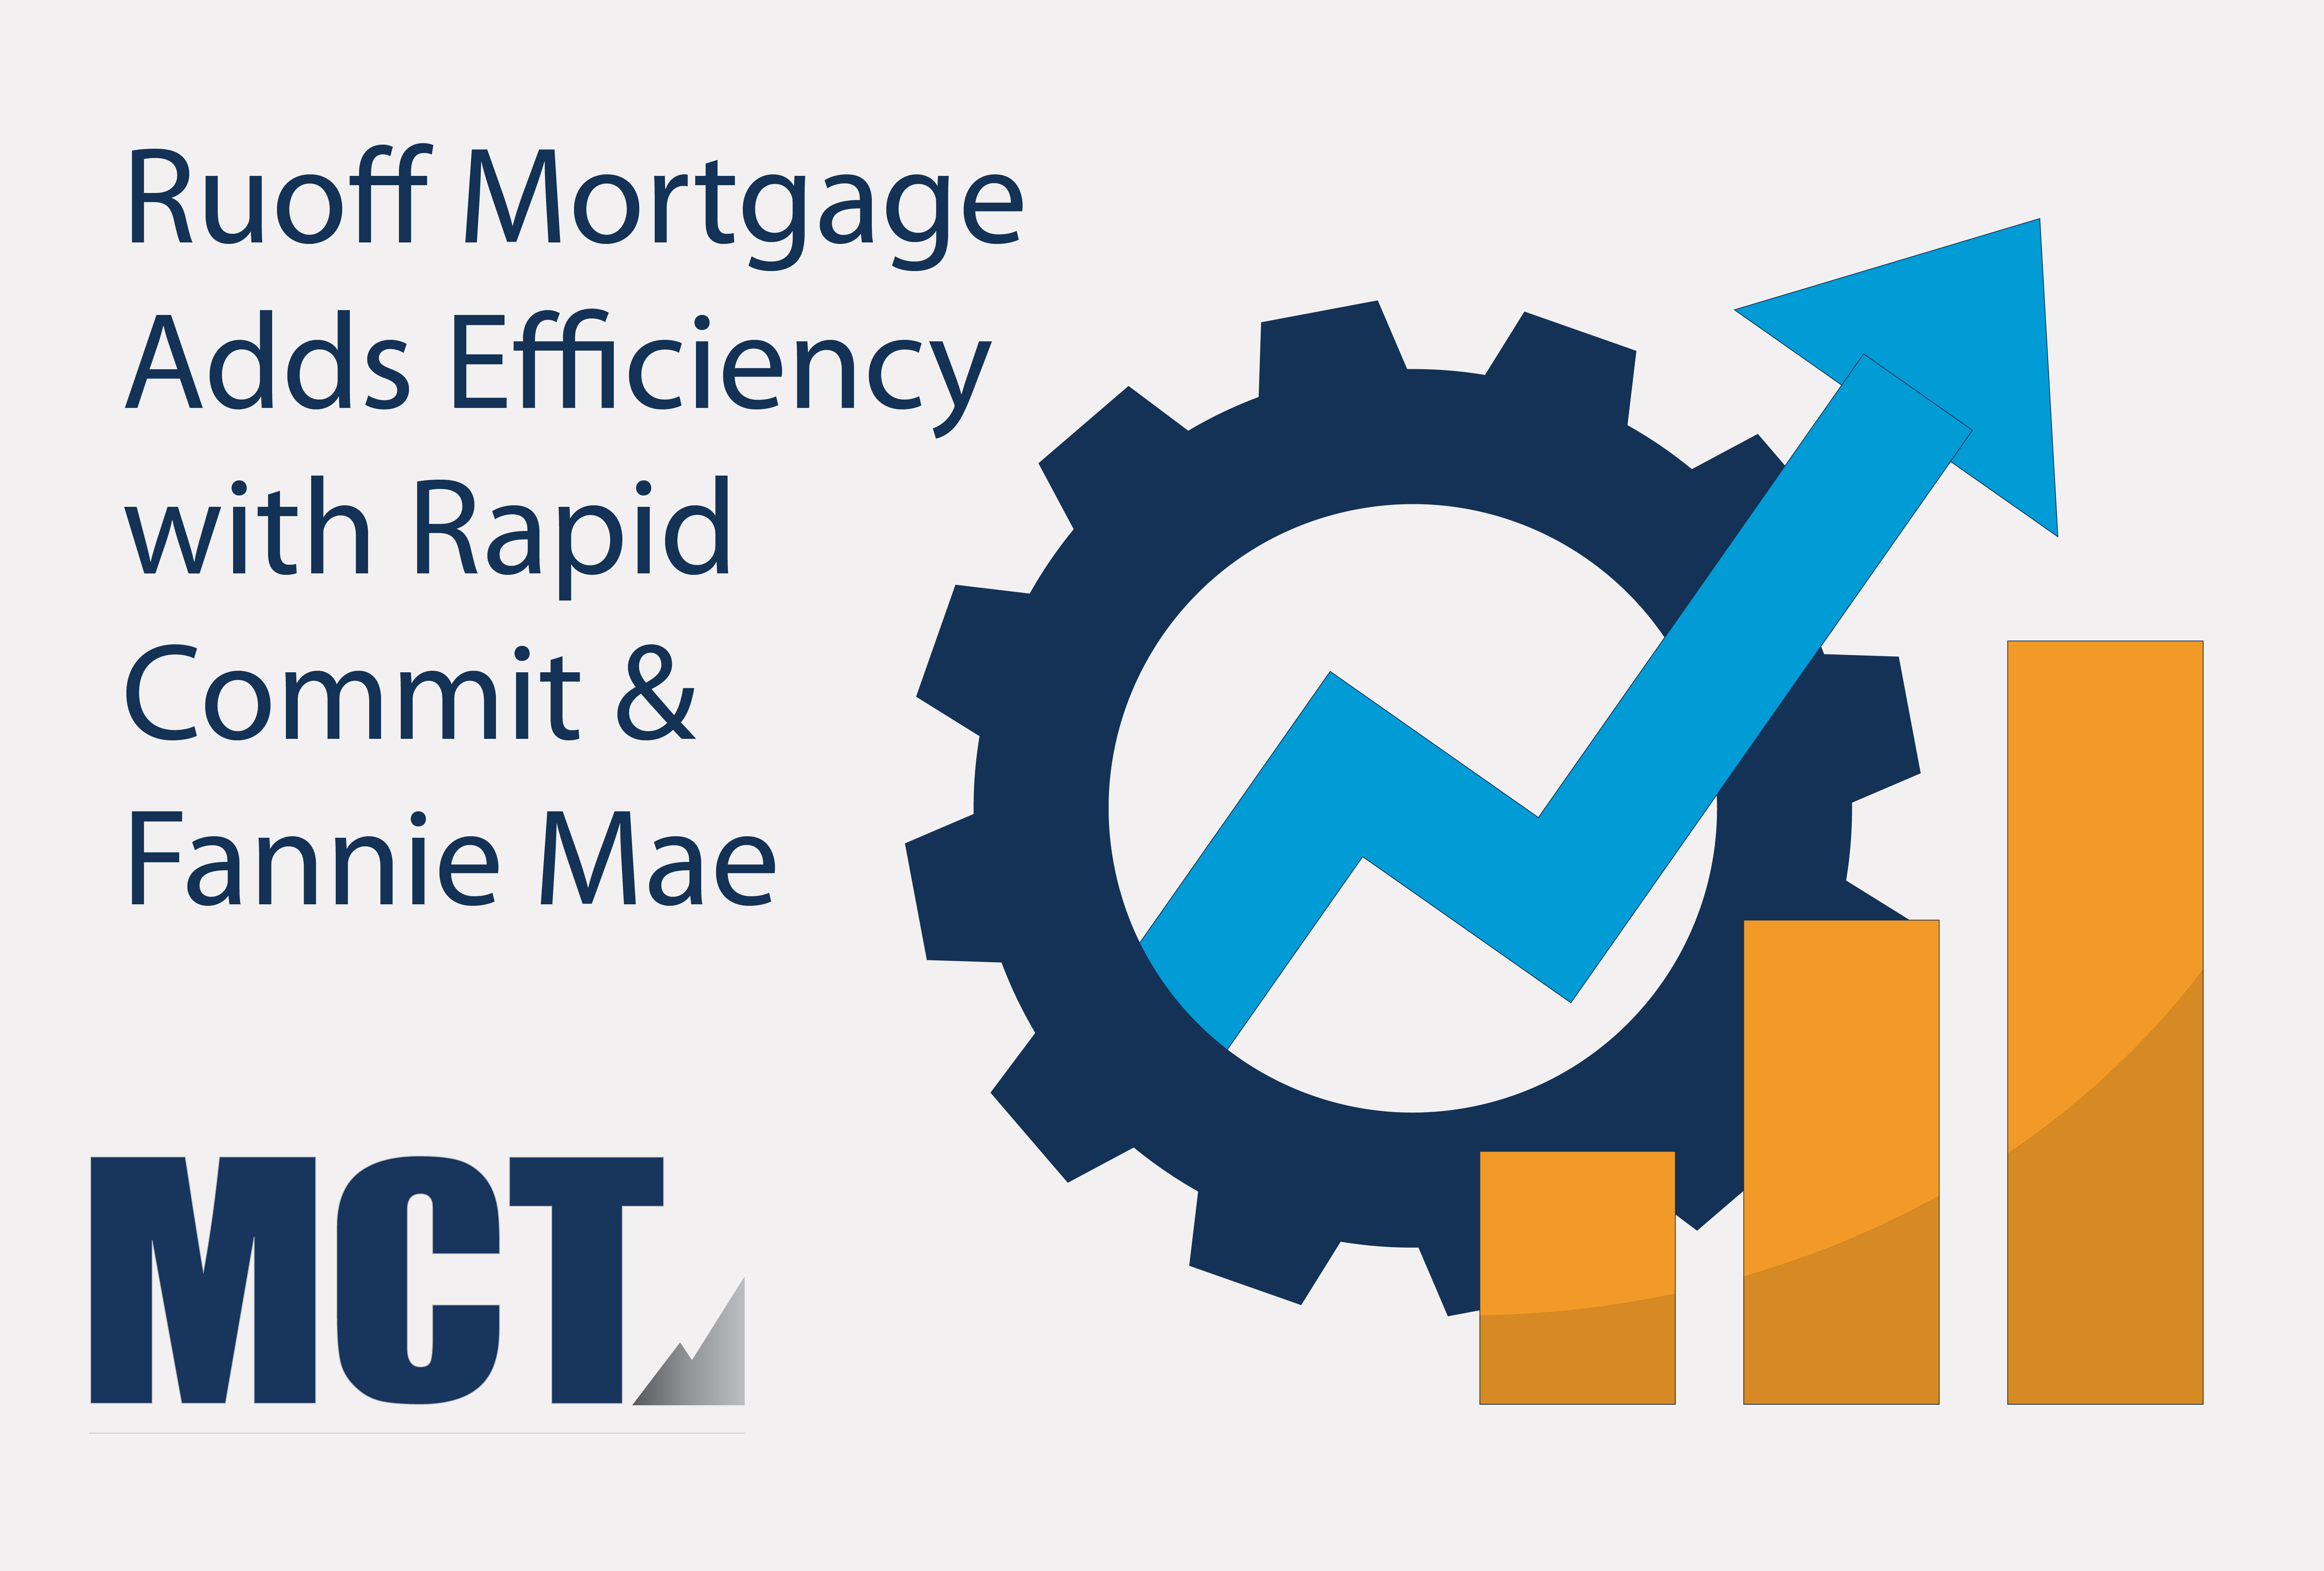 Case Study: Ruoff Mortgage Adds Efficiency with Rapid Commit & Fannie Mae